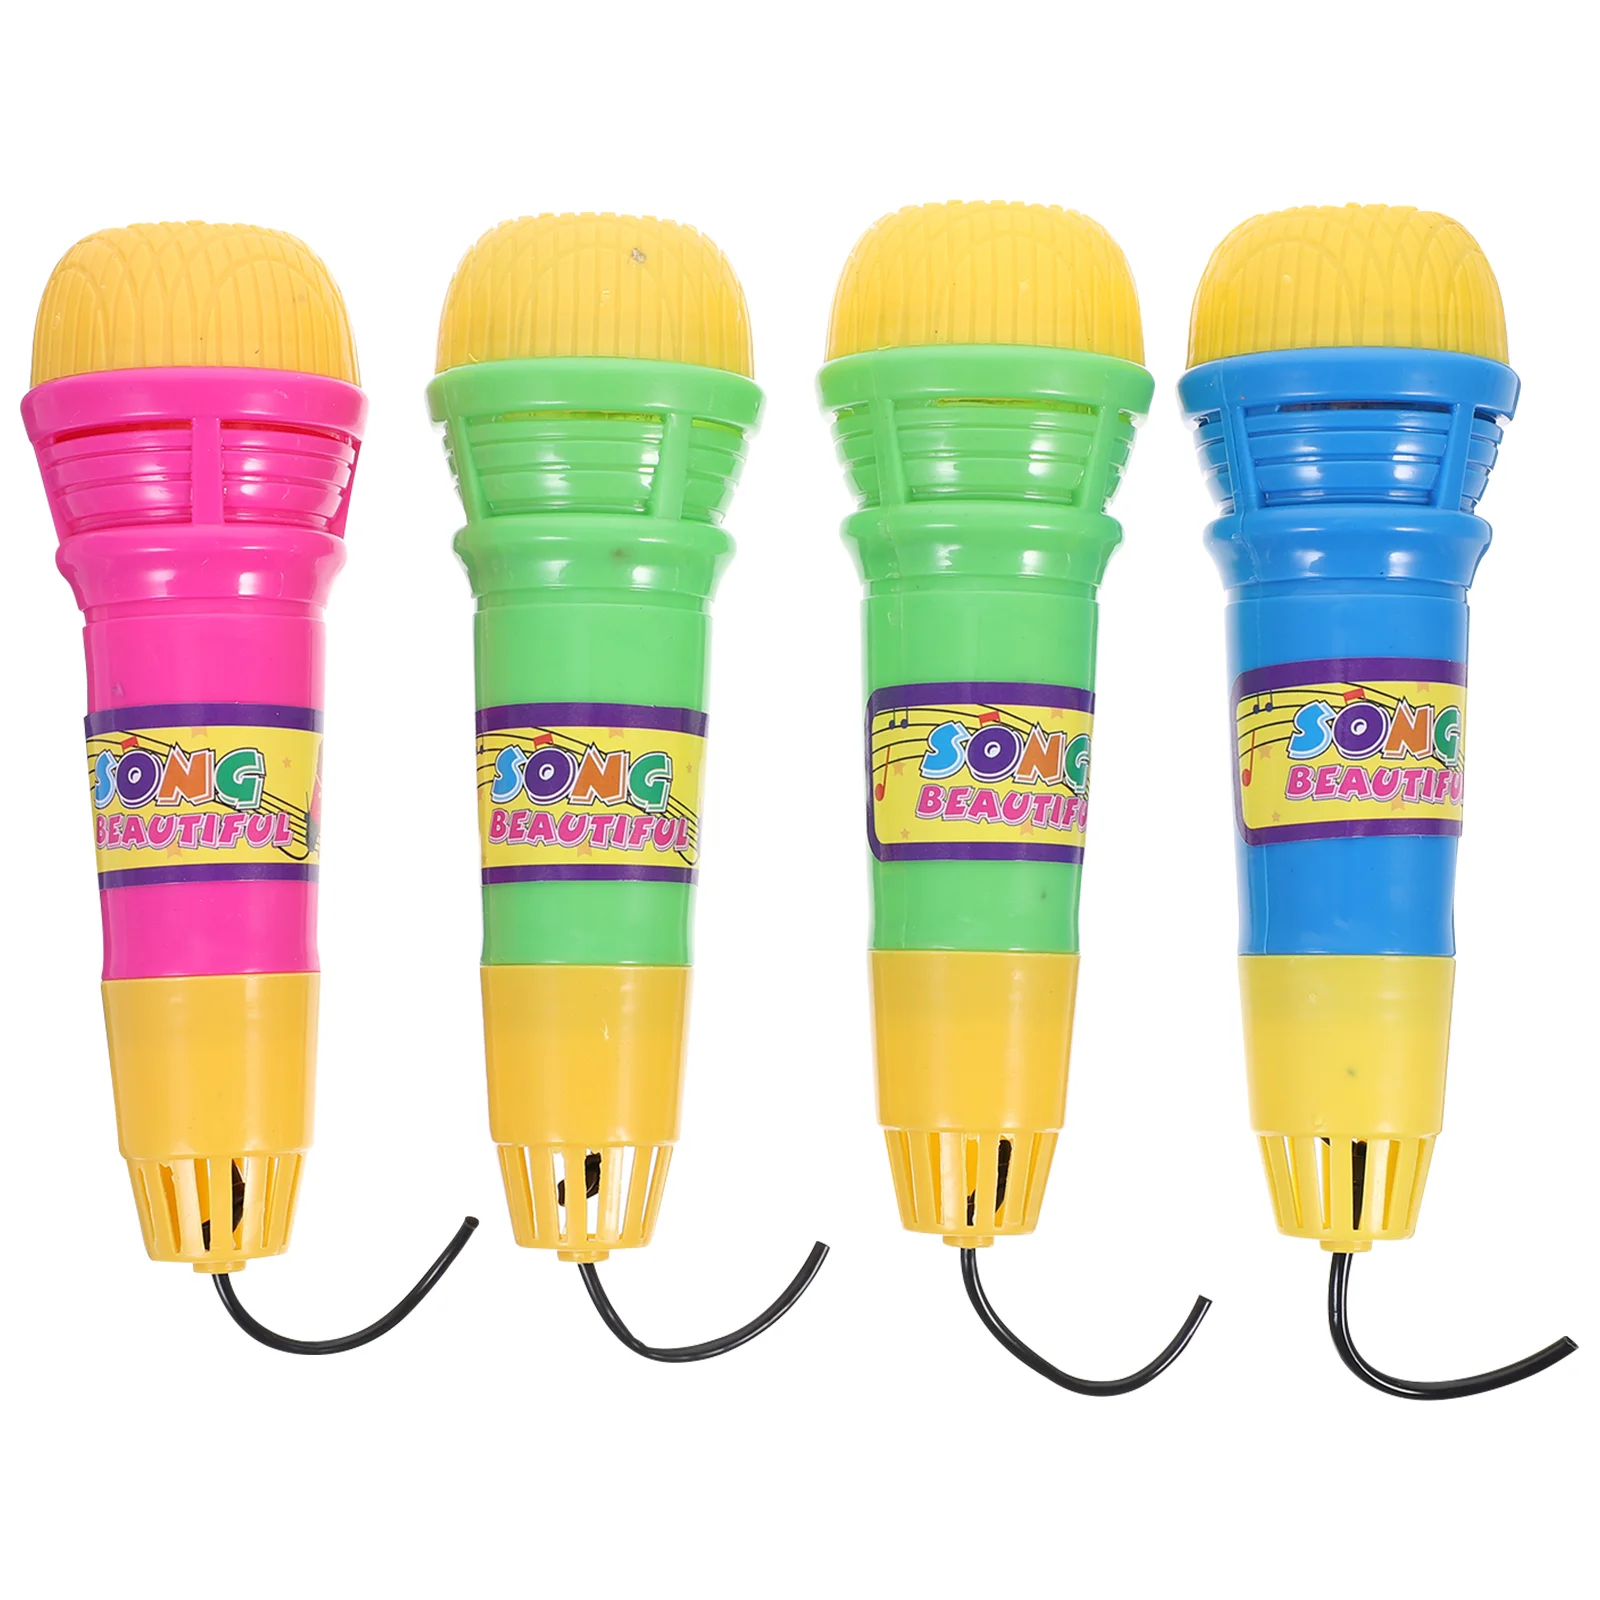 

4pcs Echo Mic Kids Microphone Voice Changing Recording Karaoke Toys Early Development for Kids Children Party Favor